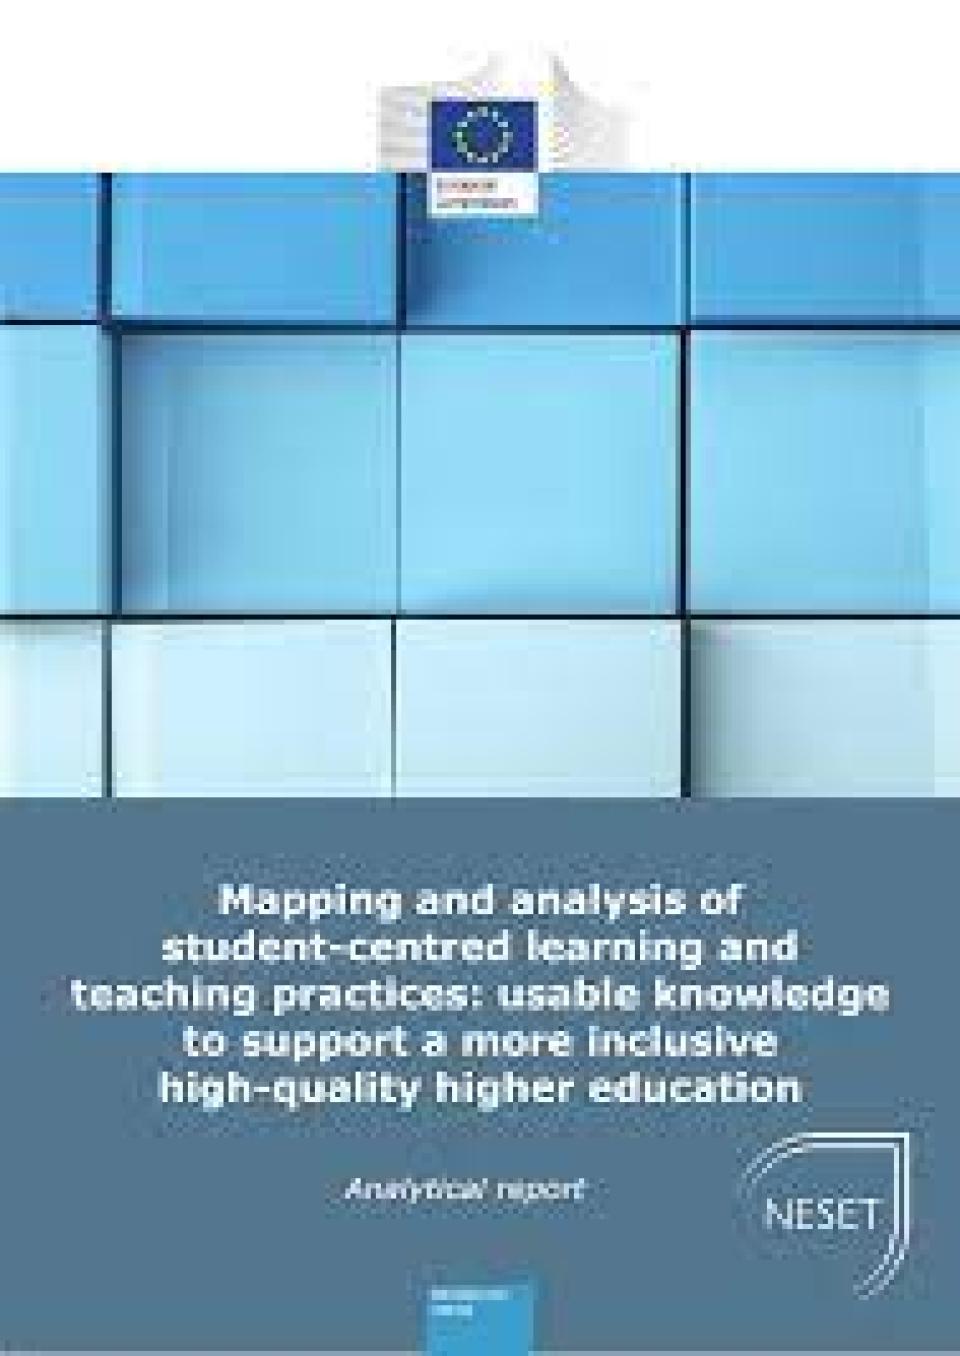 Community engagement in higher education Trends, practices and policies : analytical report